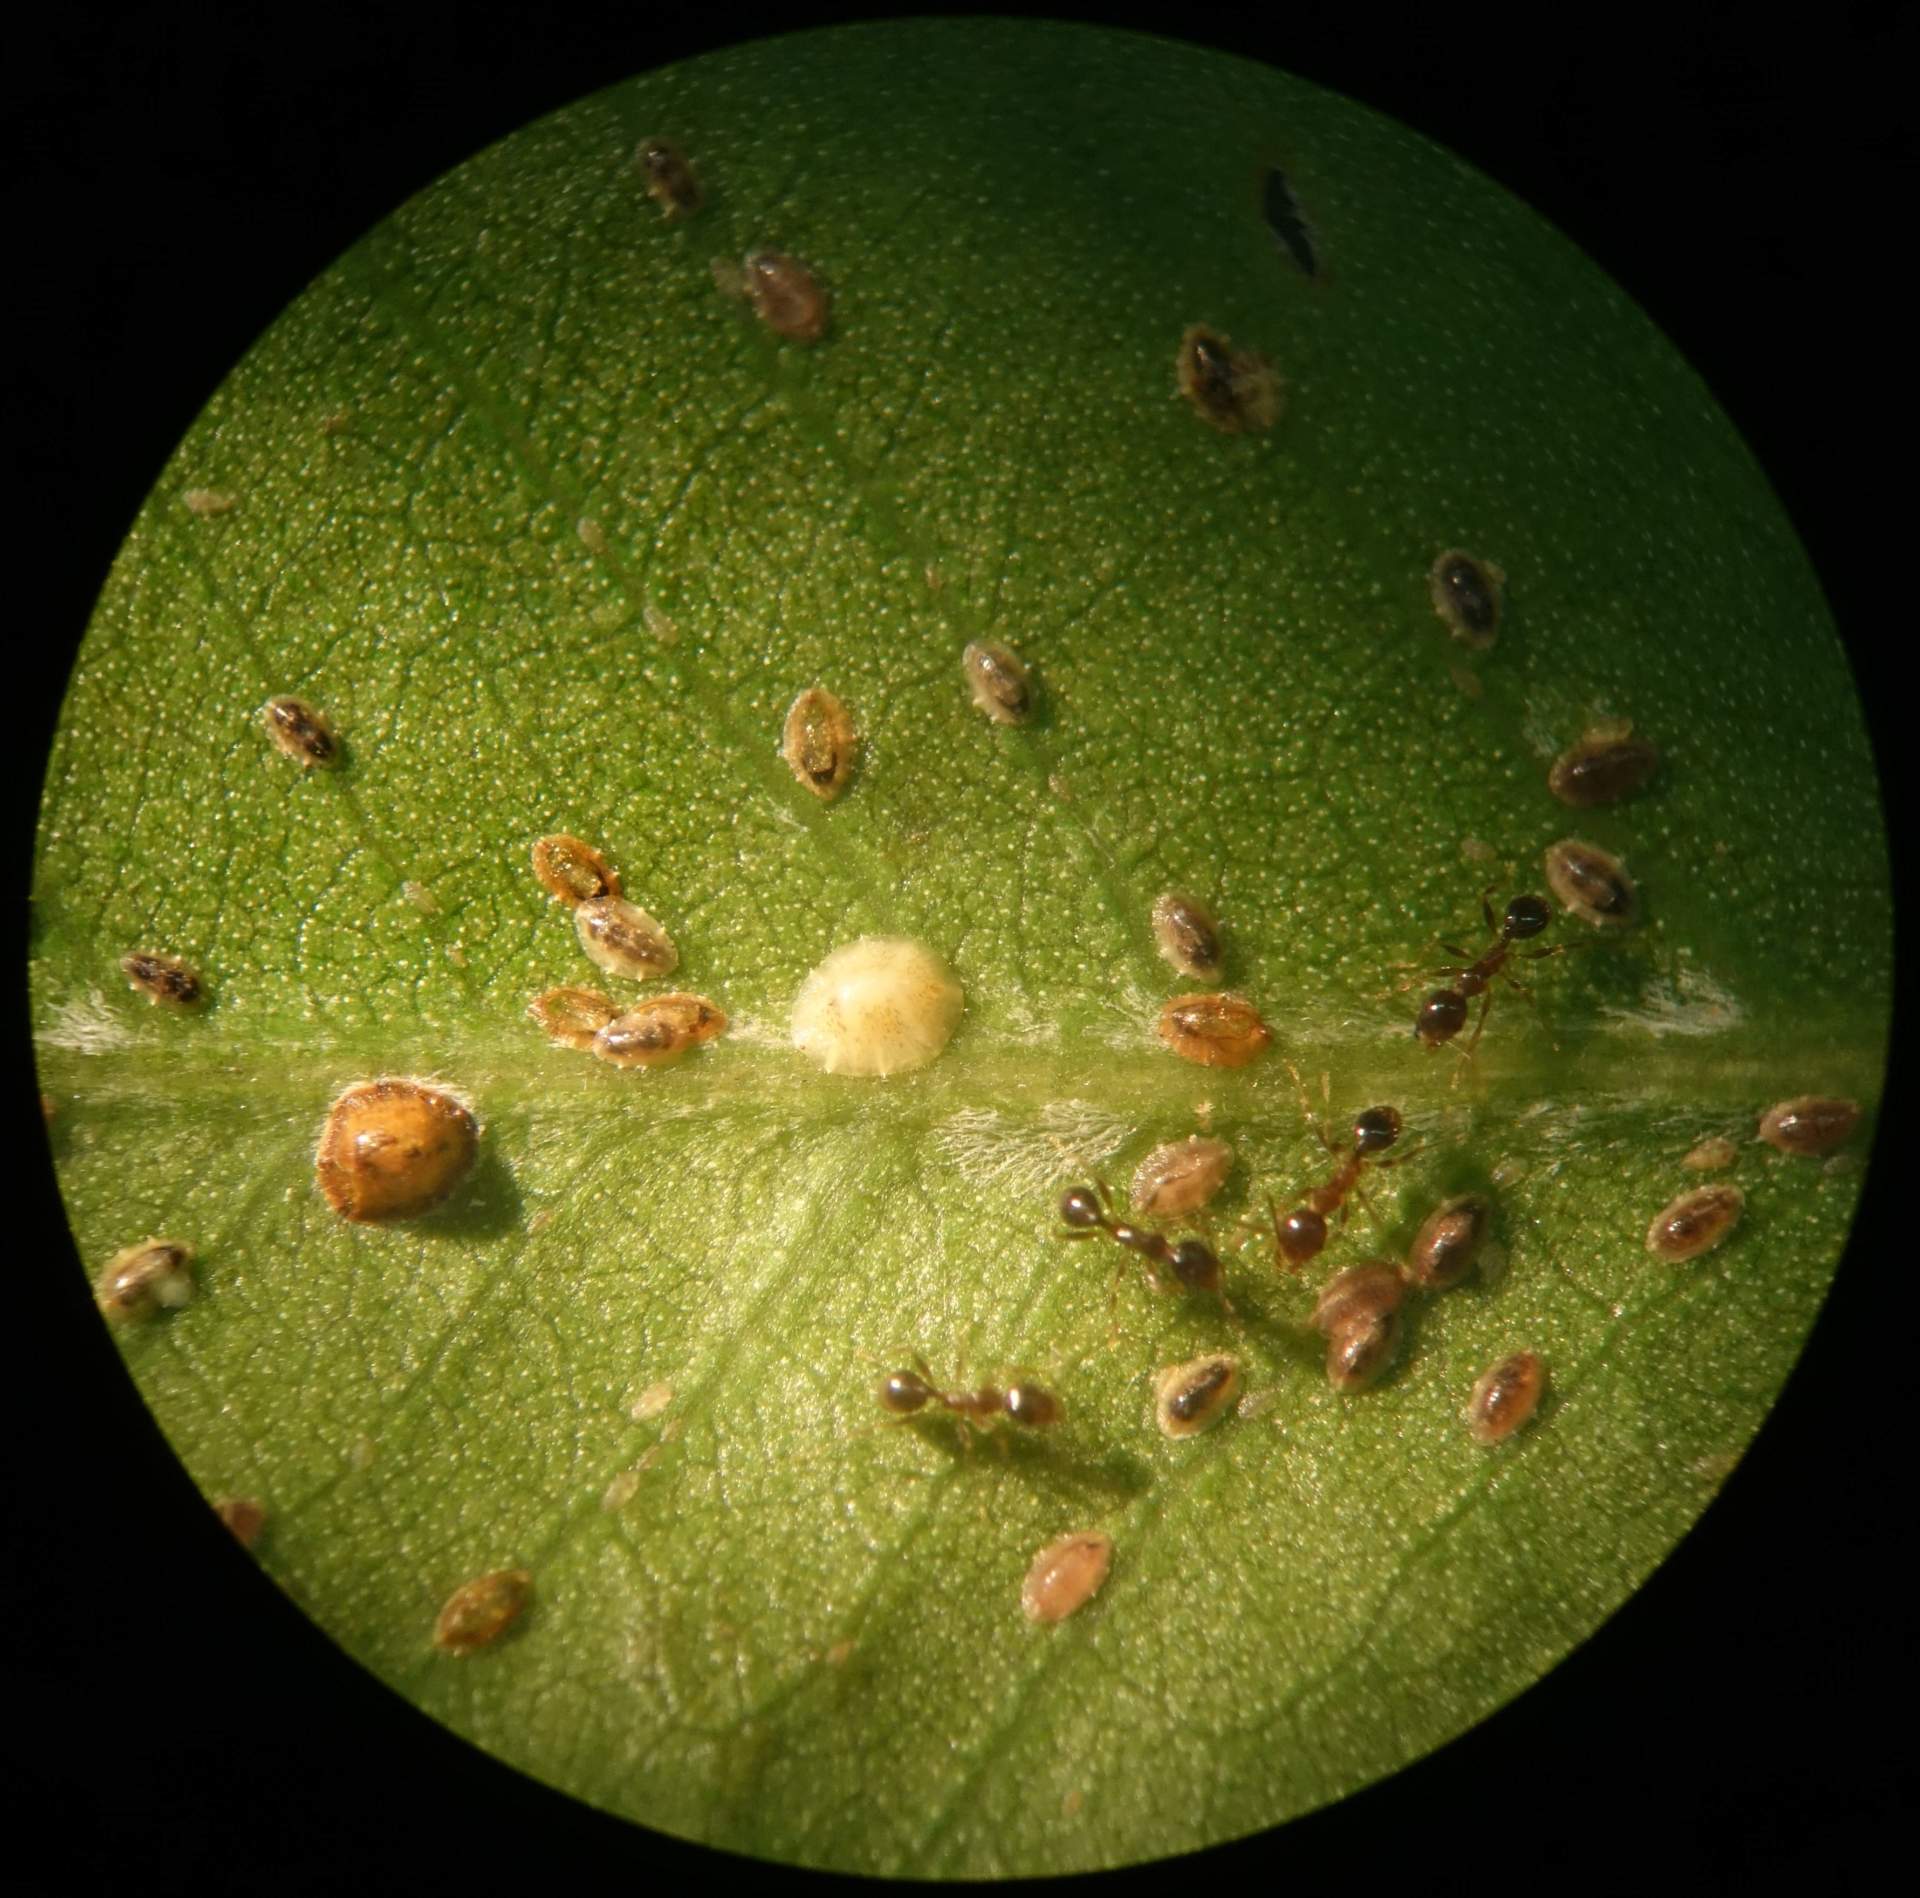 https://www.gardentech.com/-/media/project/oneweb/gardentech/images/pest-id/updated-bug-post/scale-insect/ants-and-scale-insects.jpg